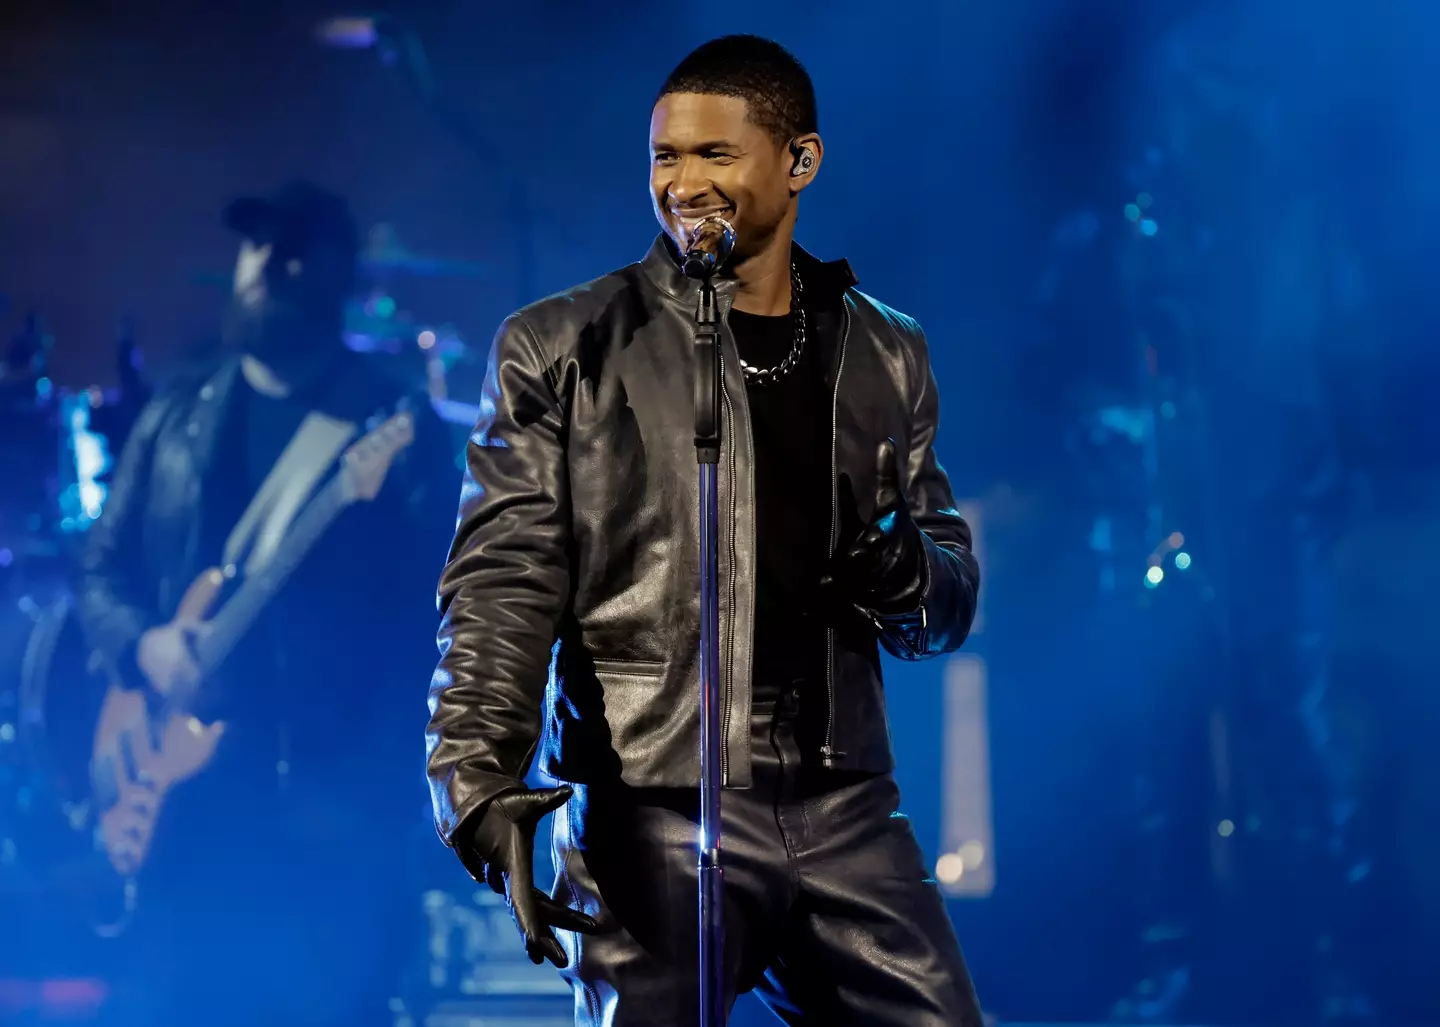 Usher won't receive any money for his halftime show at the Super Bowl.